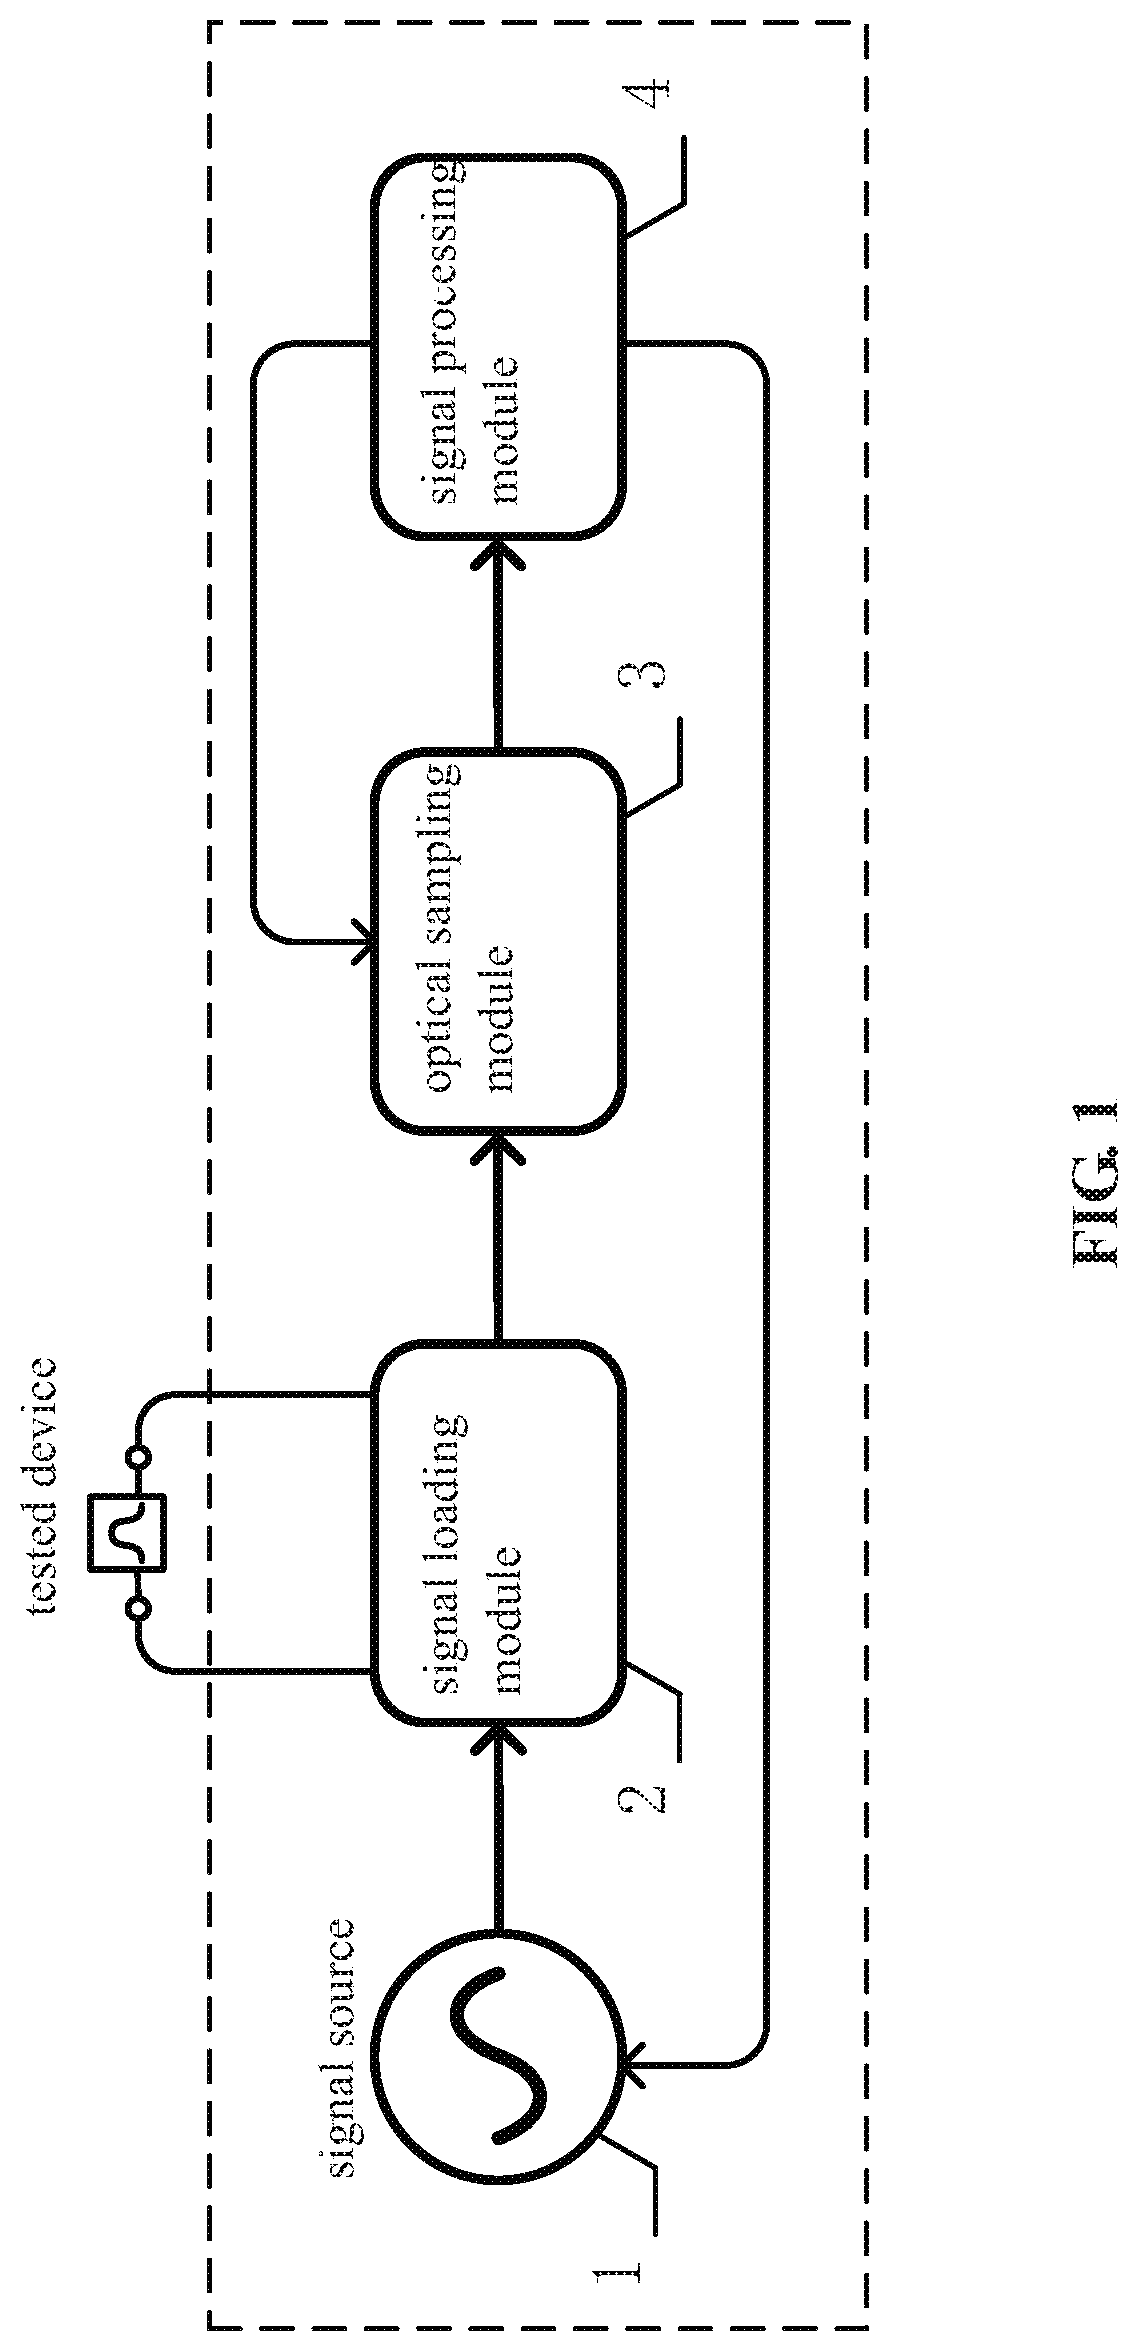 Microwave photonic vector network analyzer and method for measuring scattering parameters of microwave device